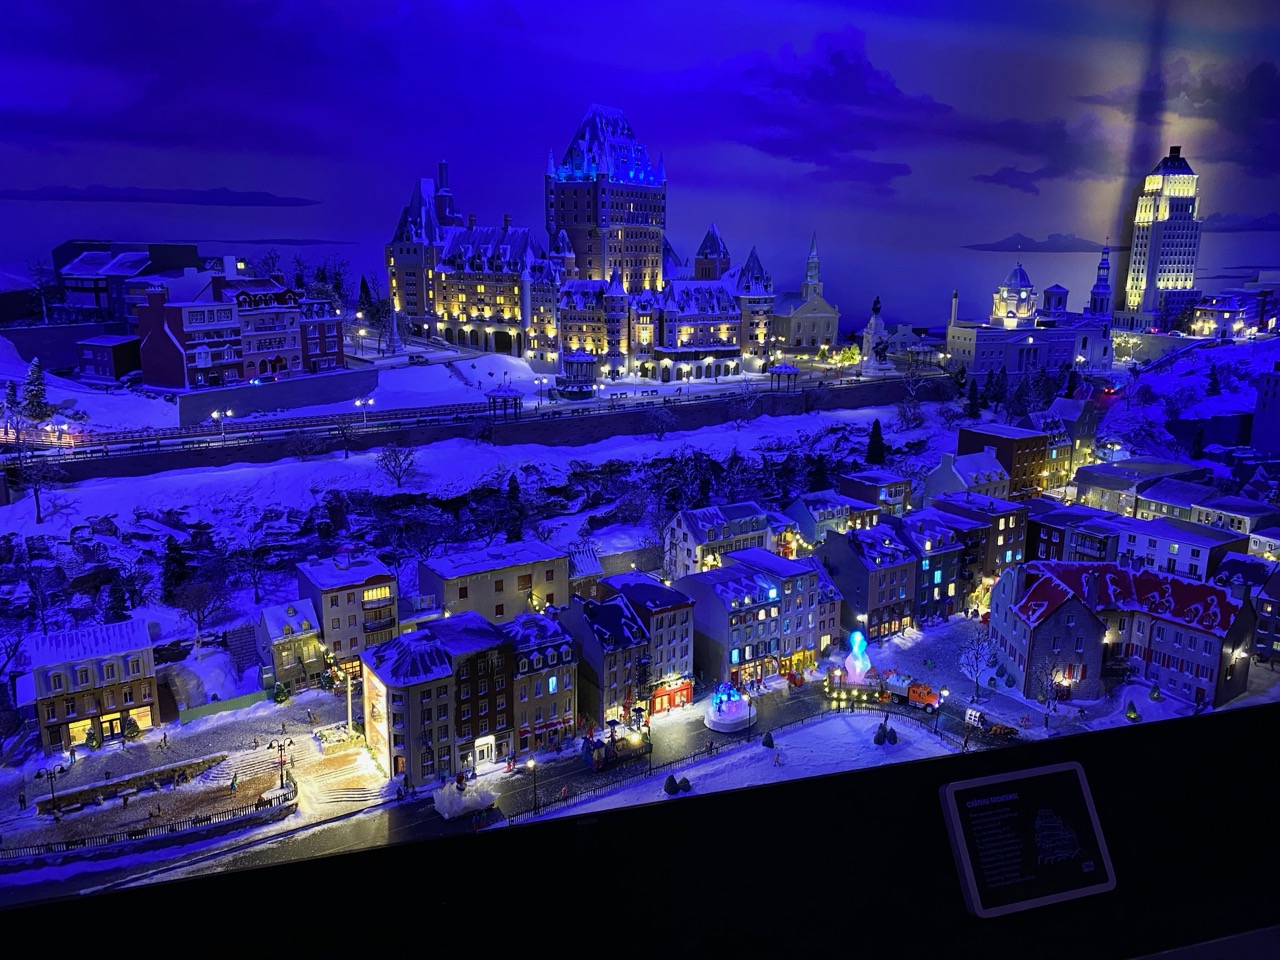 Quebec City, Little Canada at 10 Dundas Street East, Toronto, image by Craig White